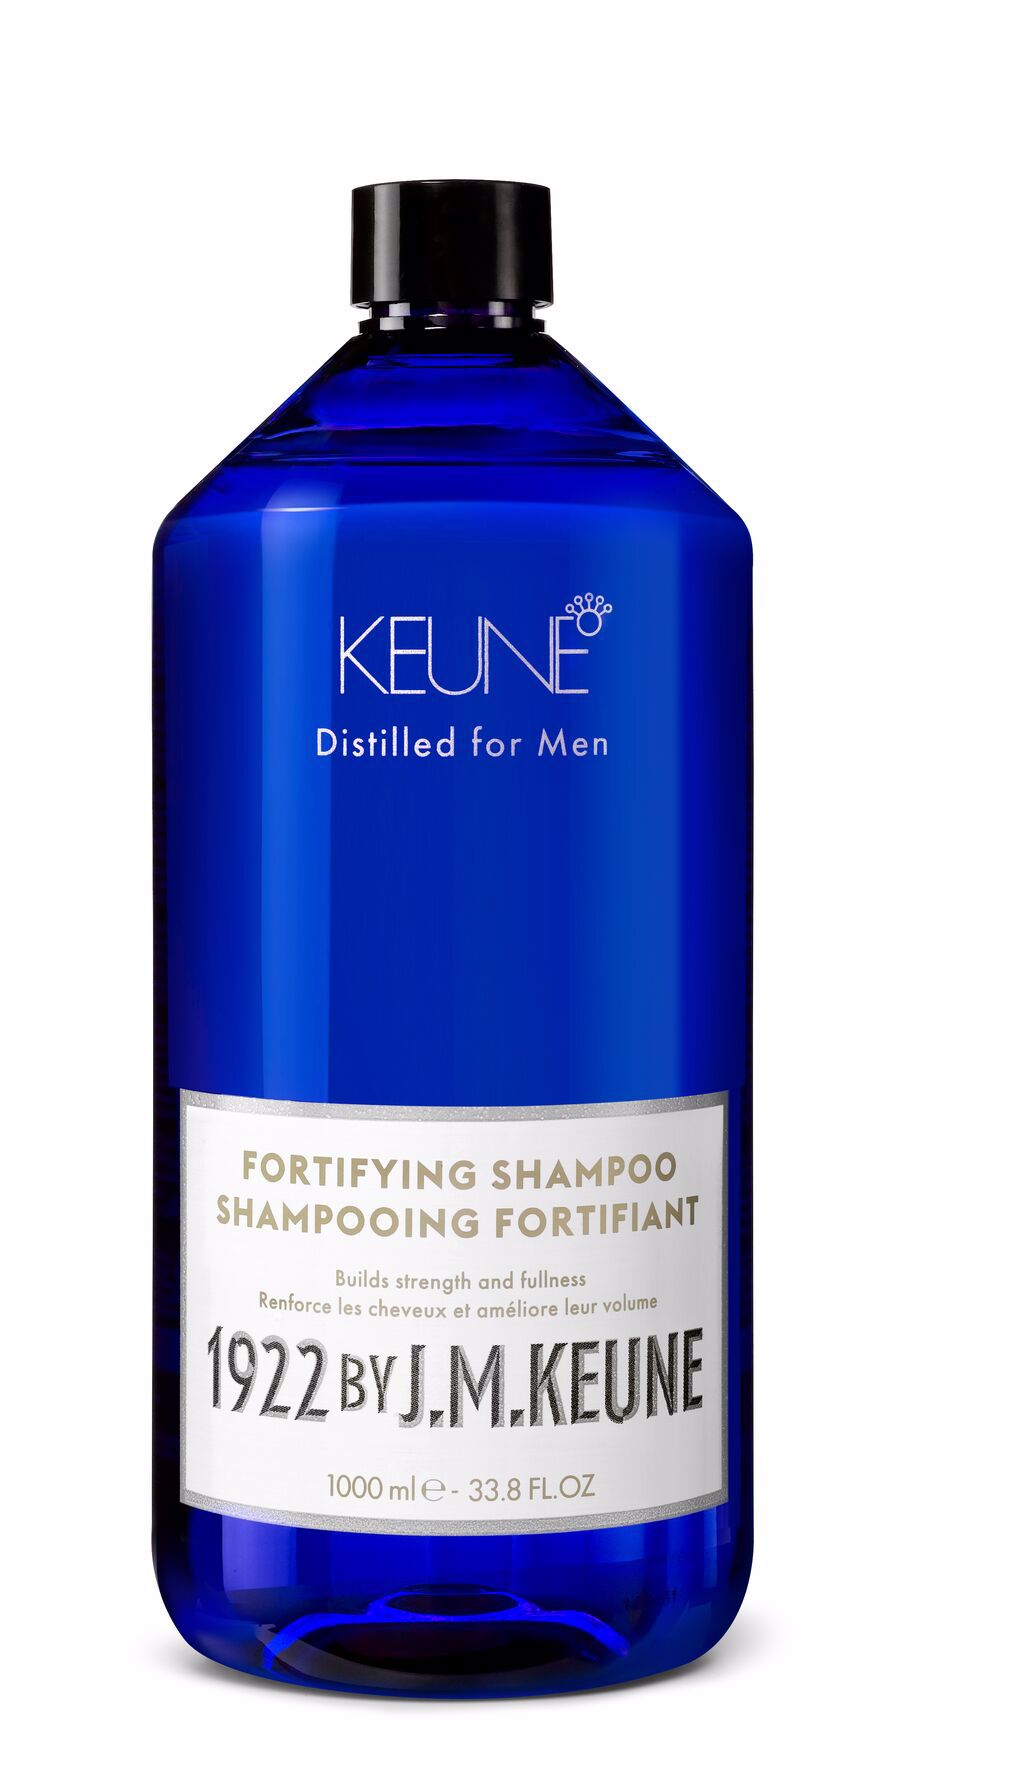 Hair loss and thinning? Our men's shampoo with Vitamin H and eucalyptus promotes strong hair. More volume, healthier hair. Test it now on keune.ch!